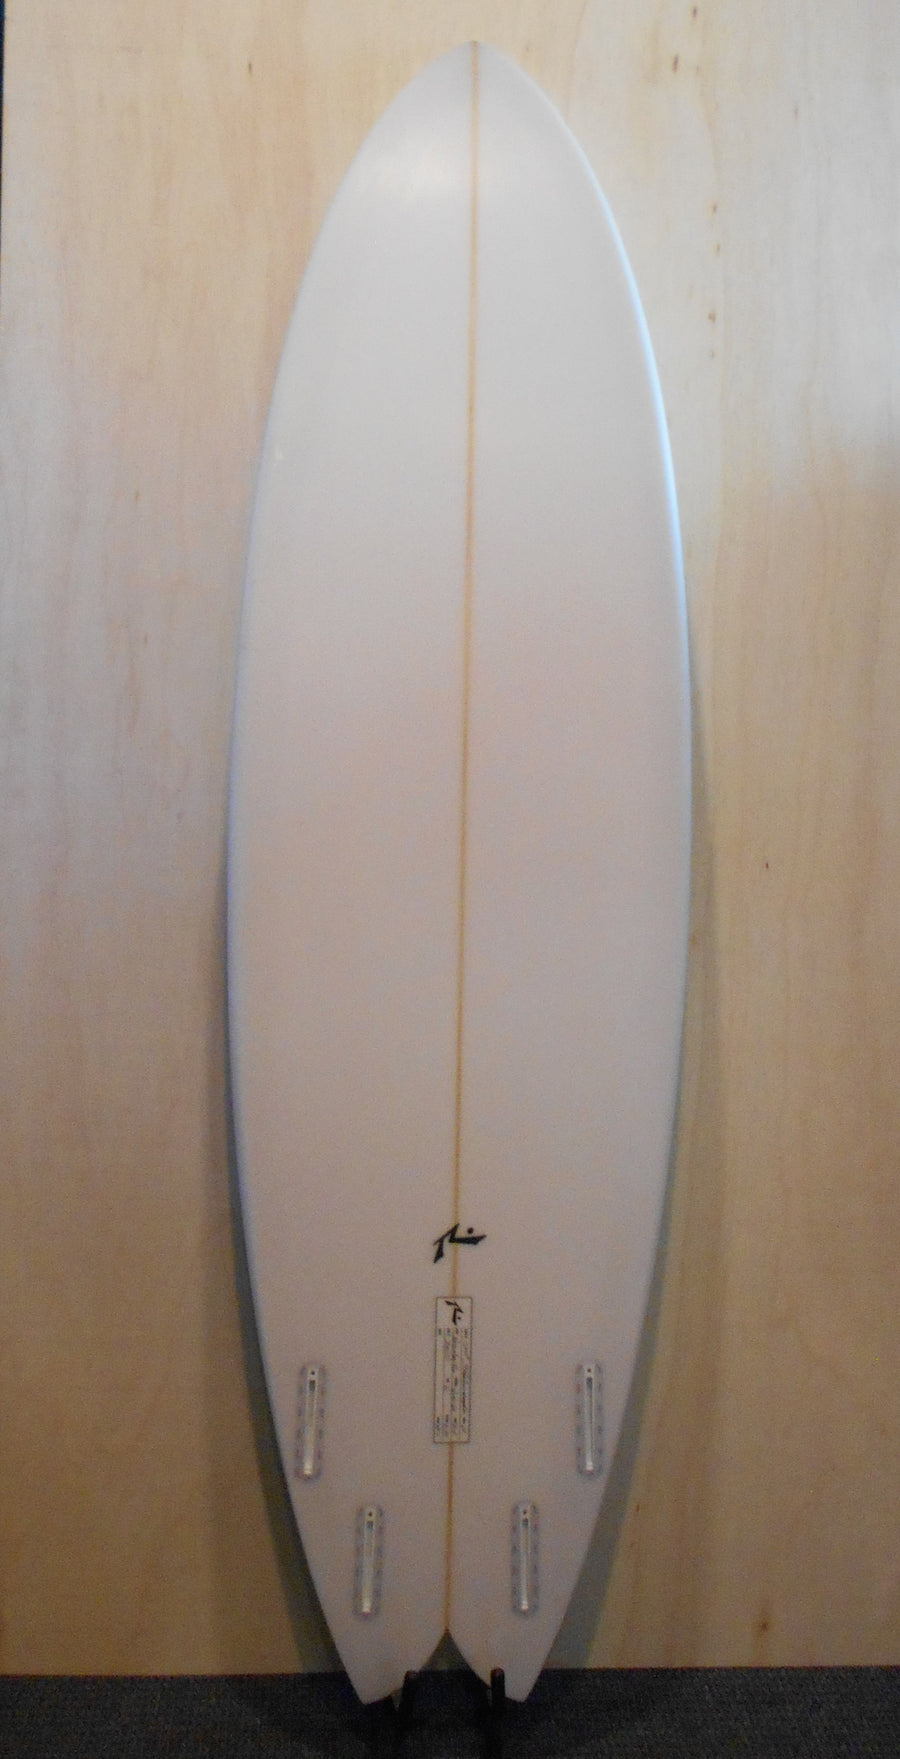 Rusty Not So Moby Fish Surfboard (New)